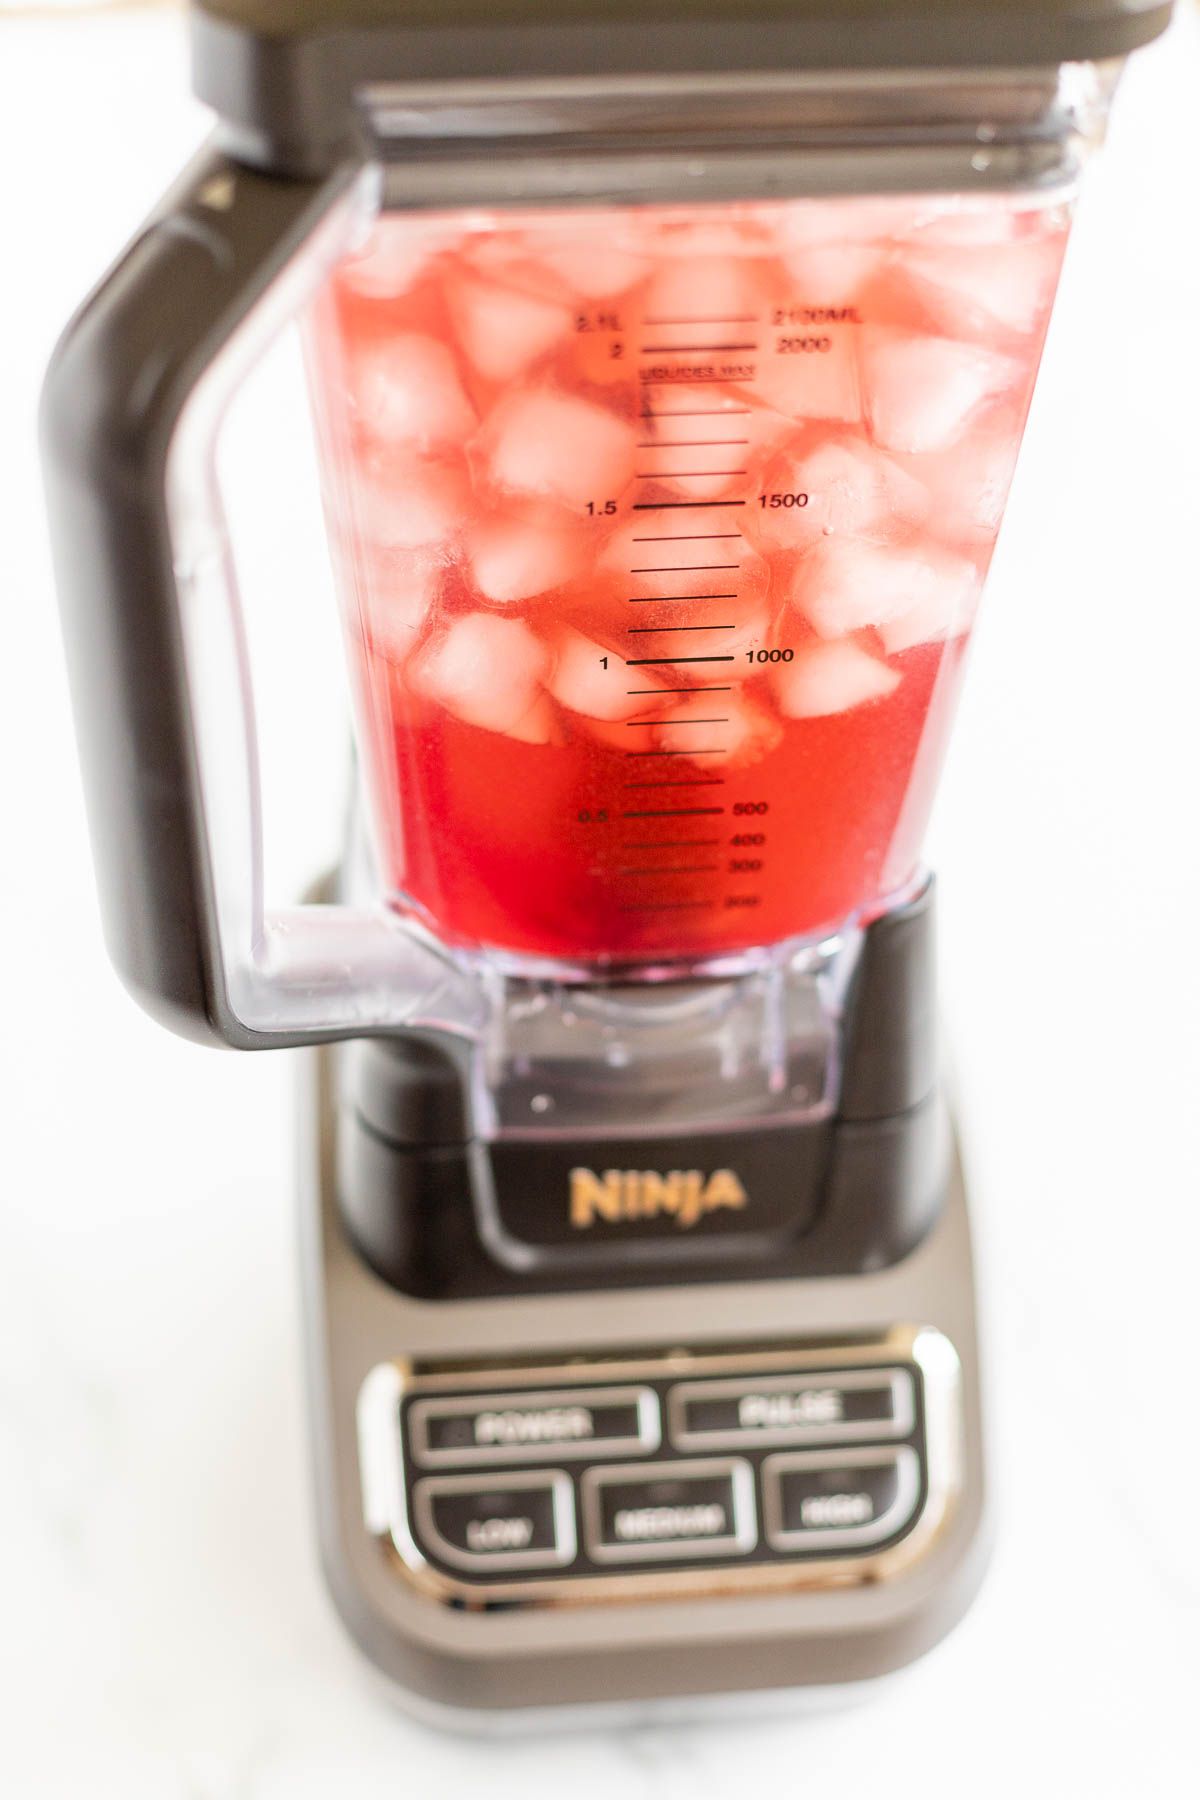 A Ninja blender full of ice and cranberry margarita ingredients